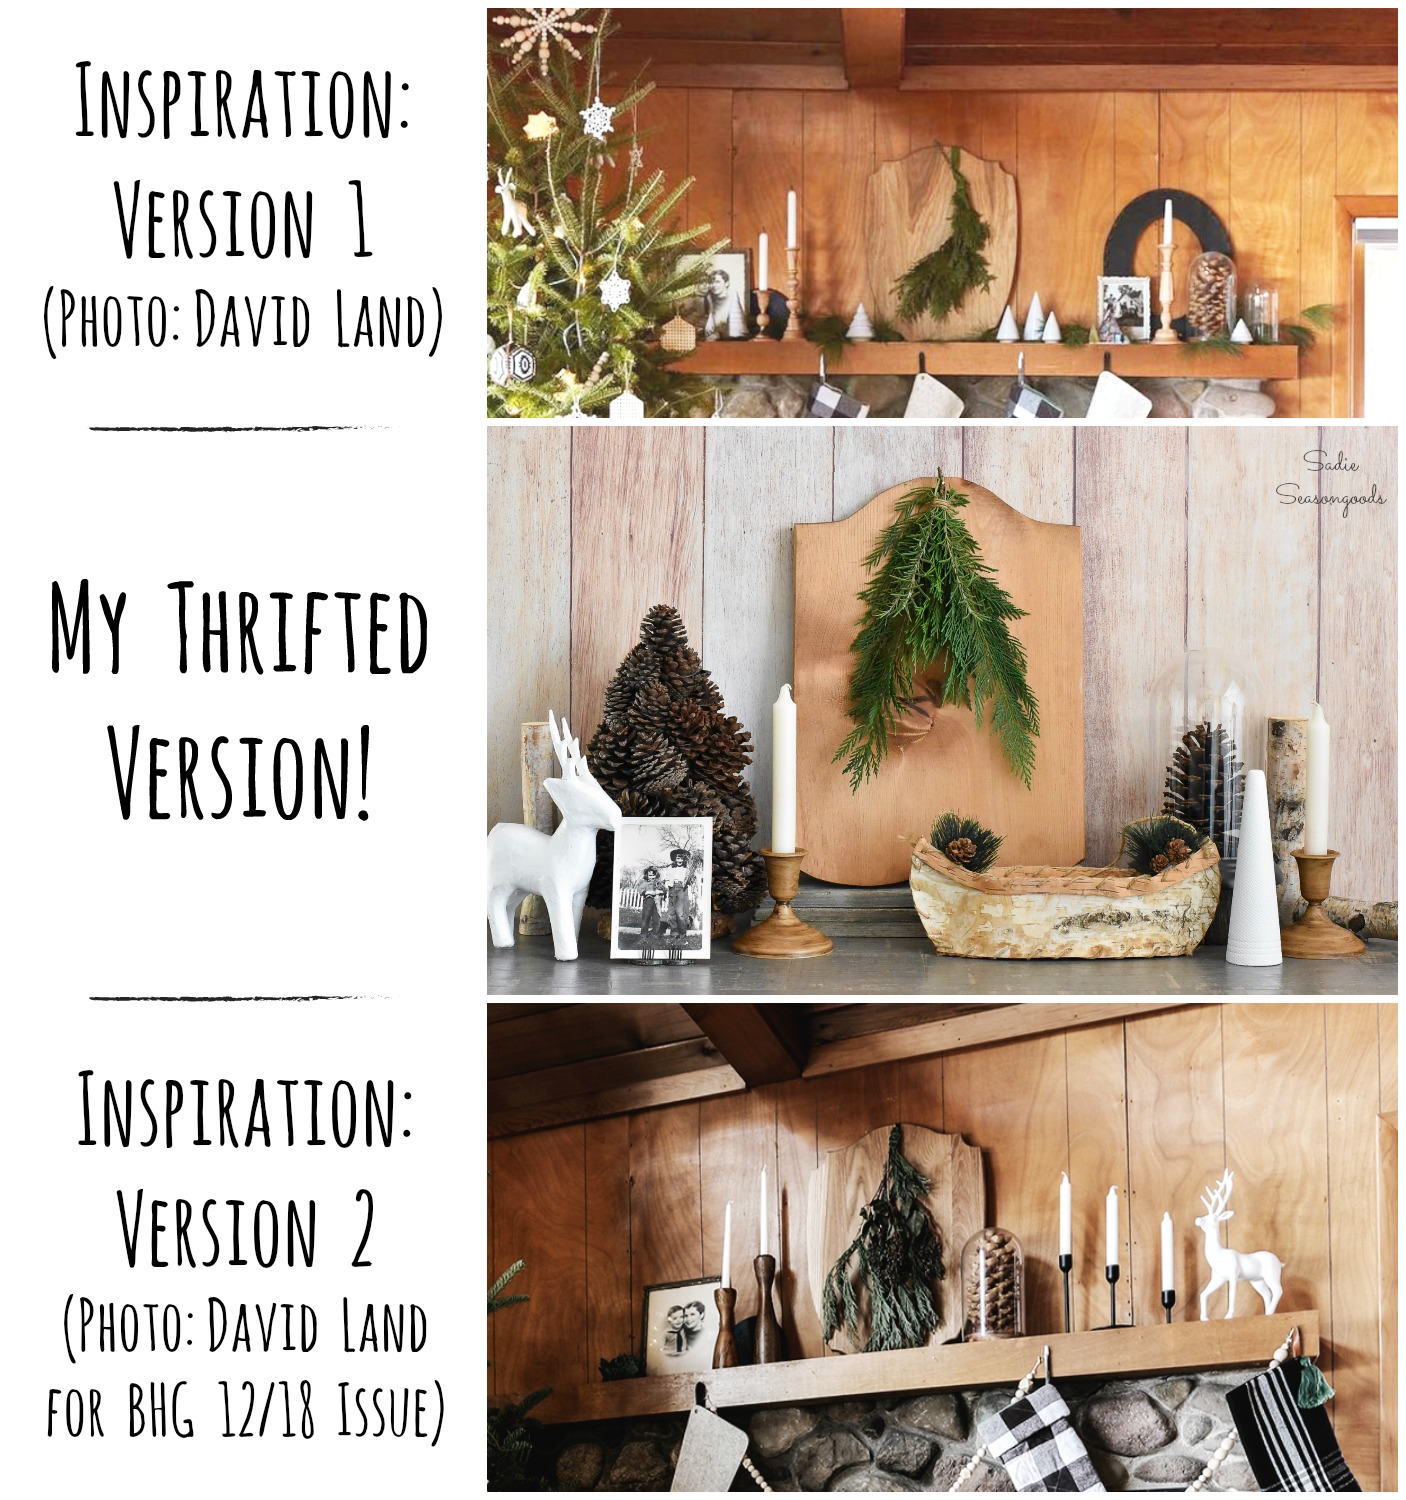 Thrift store decor for a winter cabin or lodge decor and repurposing craft projects